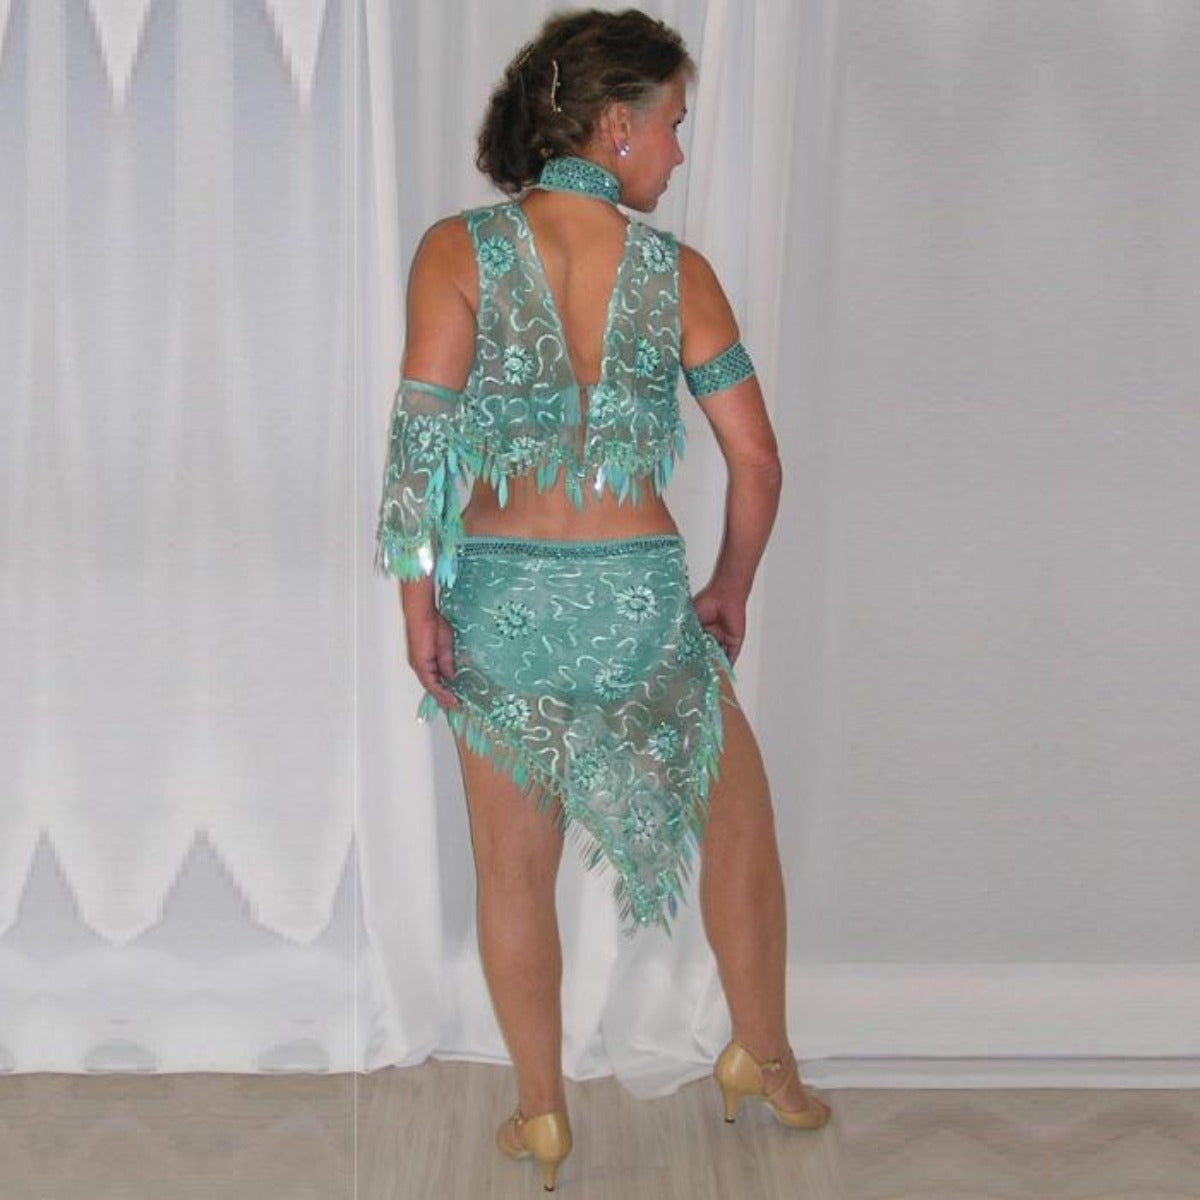 Crysta's Creations back view of Gorgeous aqua Latin/rhythm two piece dance dress created of gorgeous aqua soutache lace fabric, embellished with about 10 gross of Aqua AB Swarovski stones with lots of hand beading & paillettes.